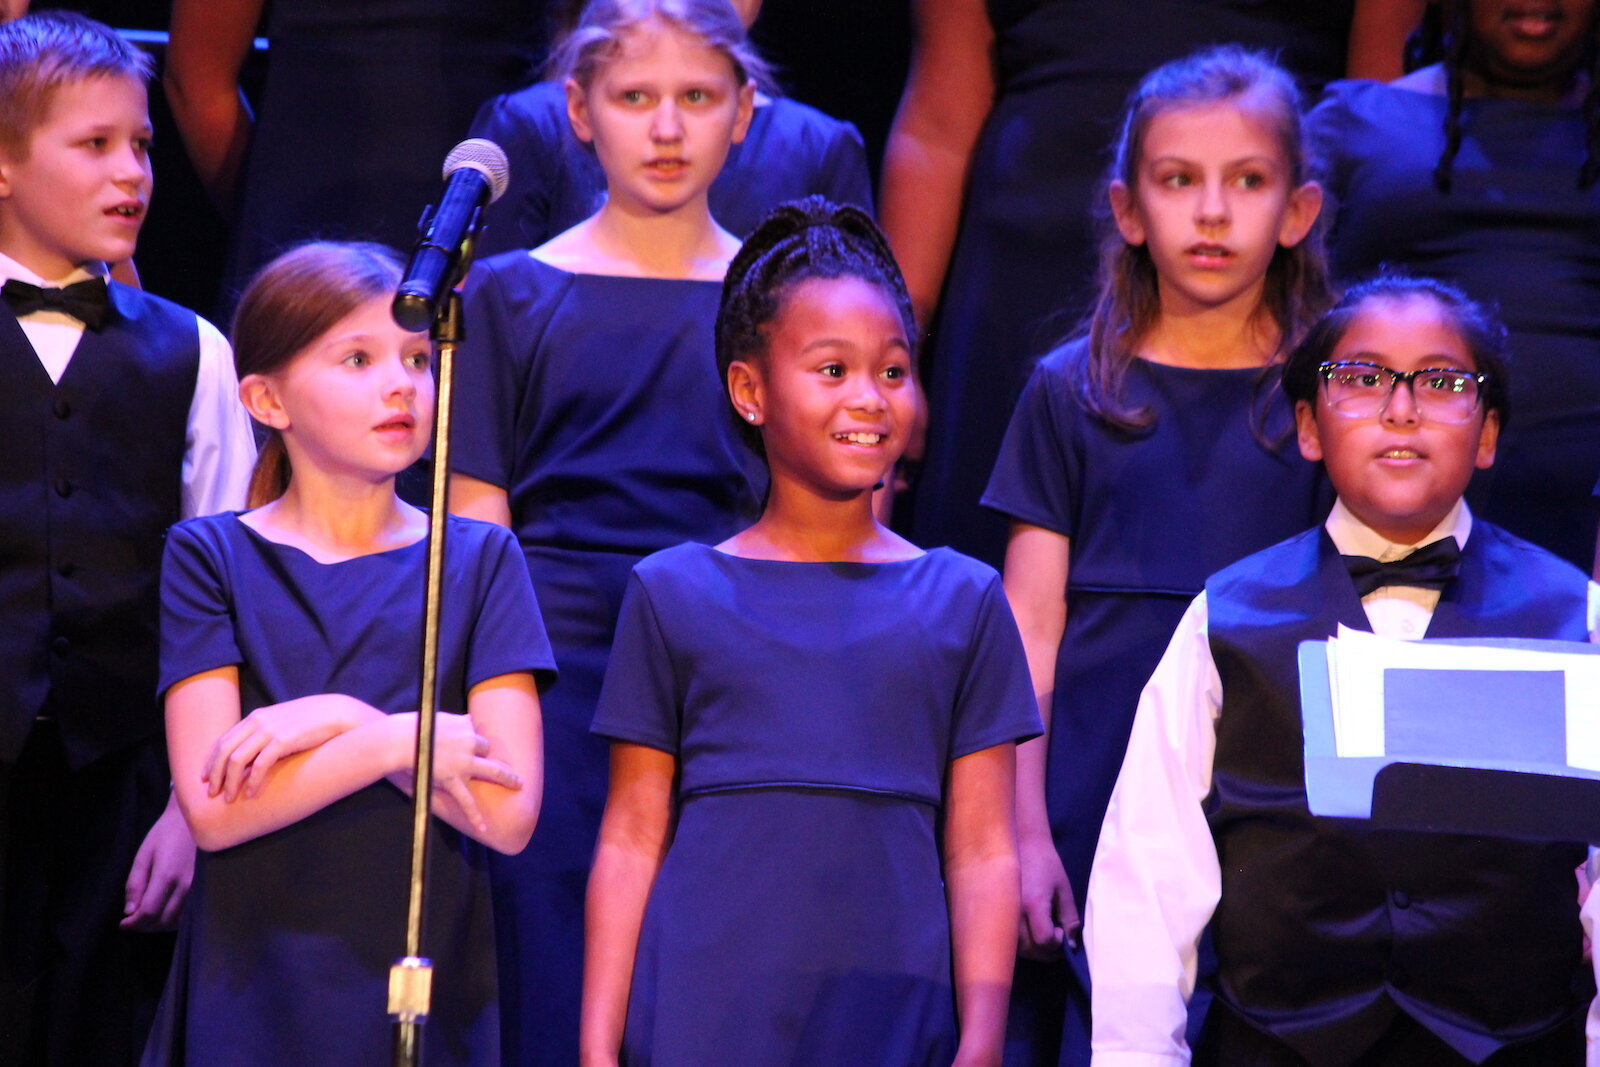 For the holidays, the Fort Wayne Children's Choir participates in numerous performances across the community with eight different choirs.